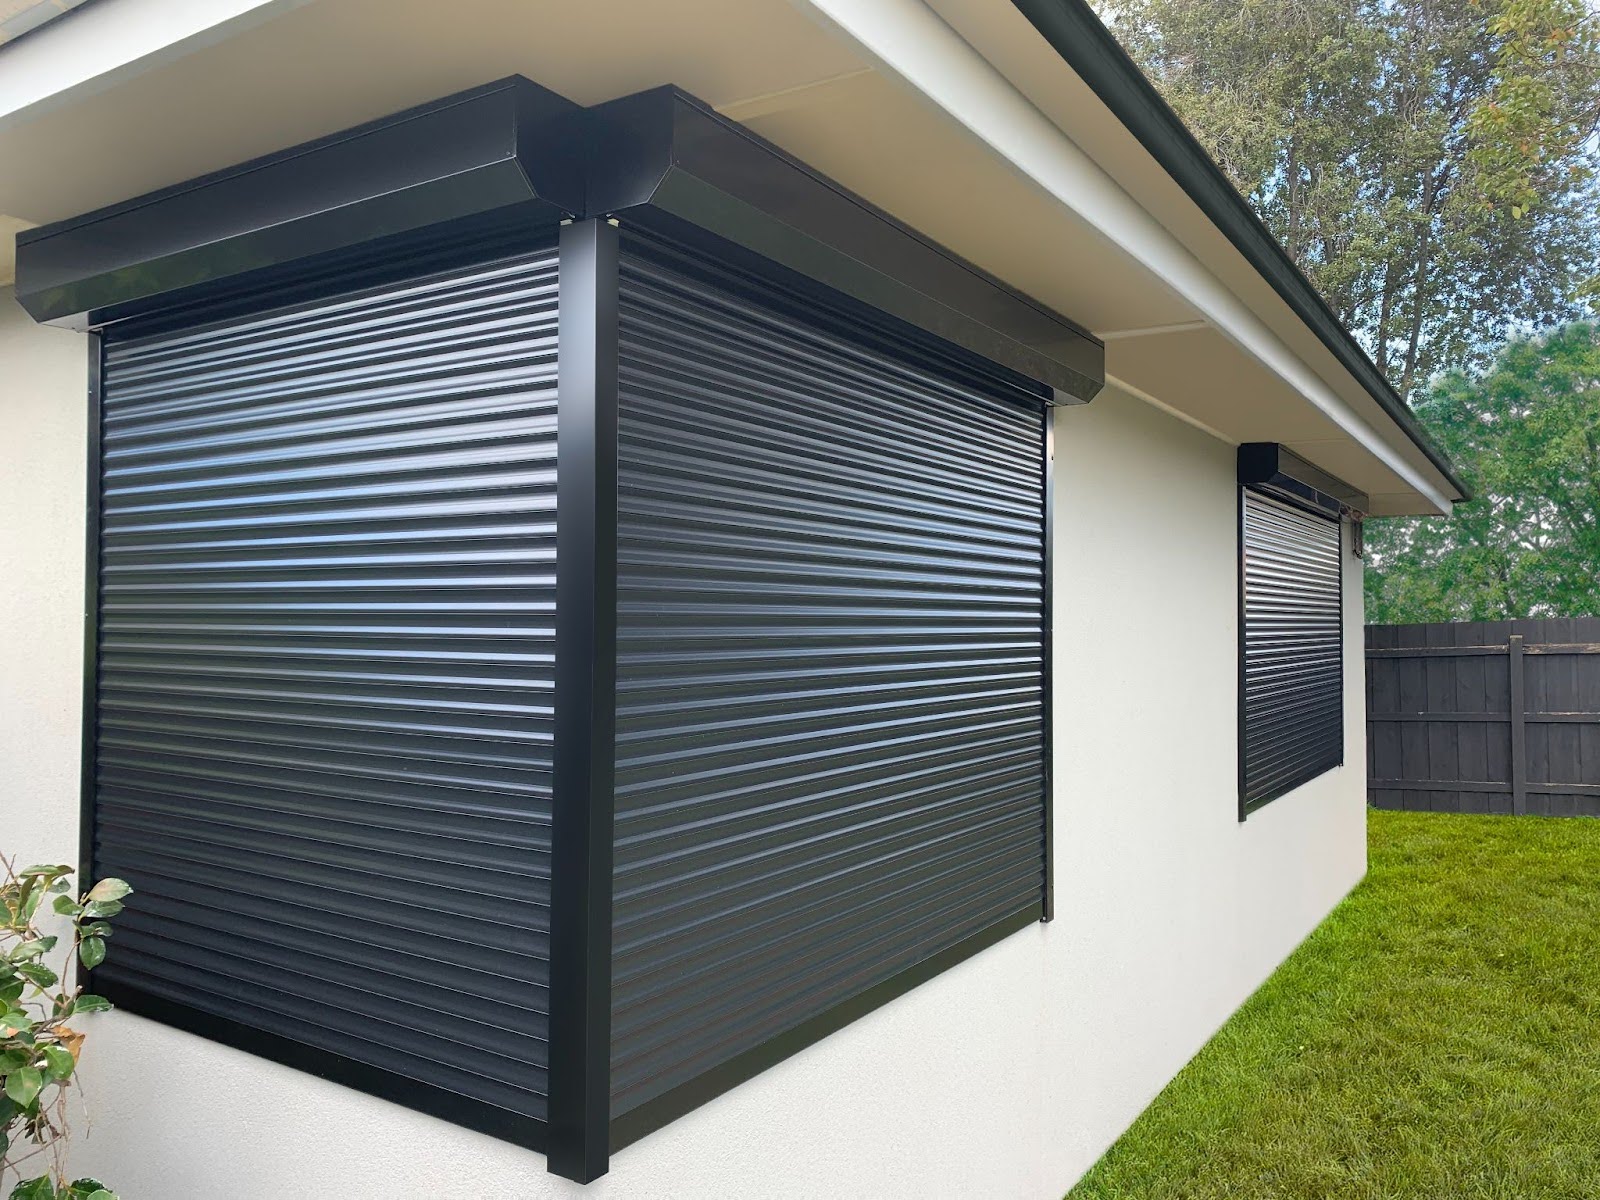 How do security shutters work?